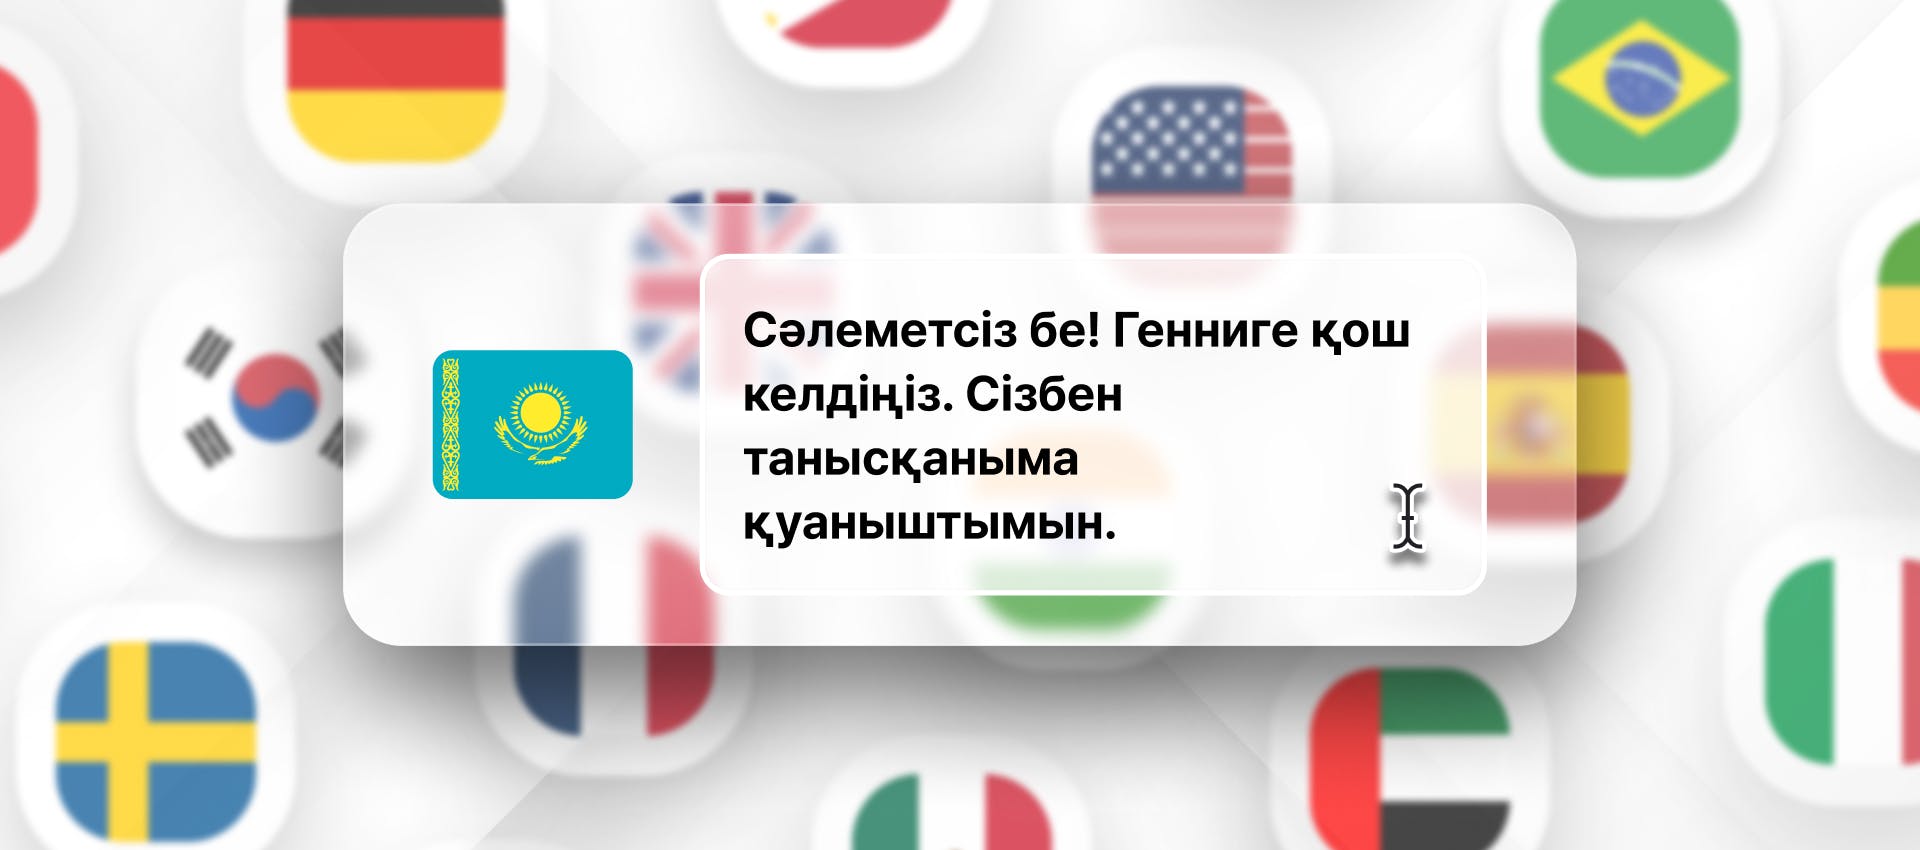 Kazakh phrase for Kazakh TTS generation with different flags in the background